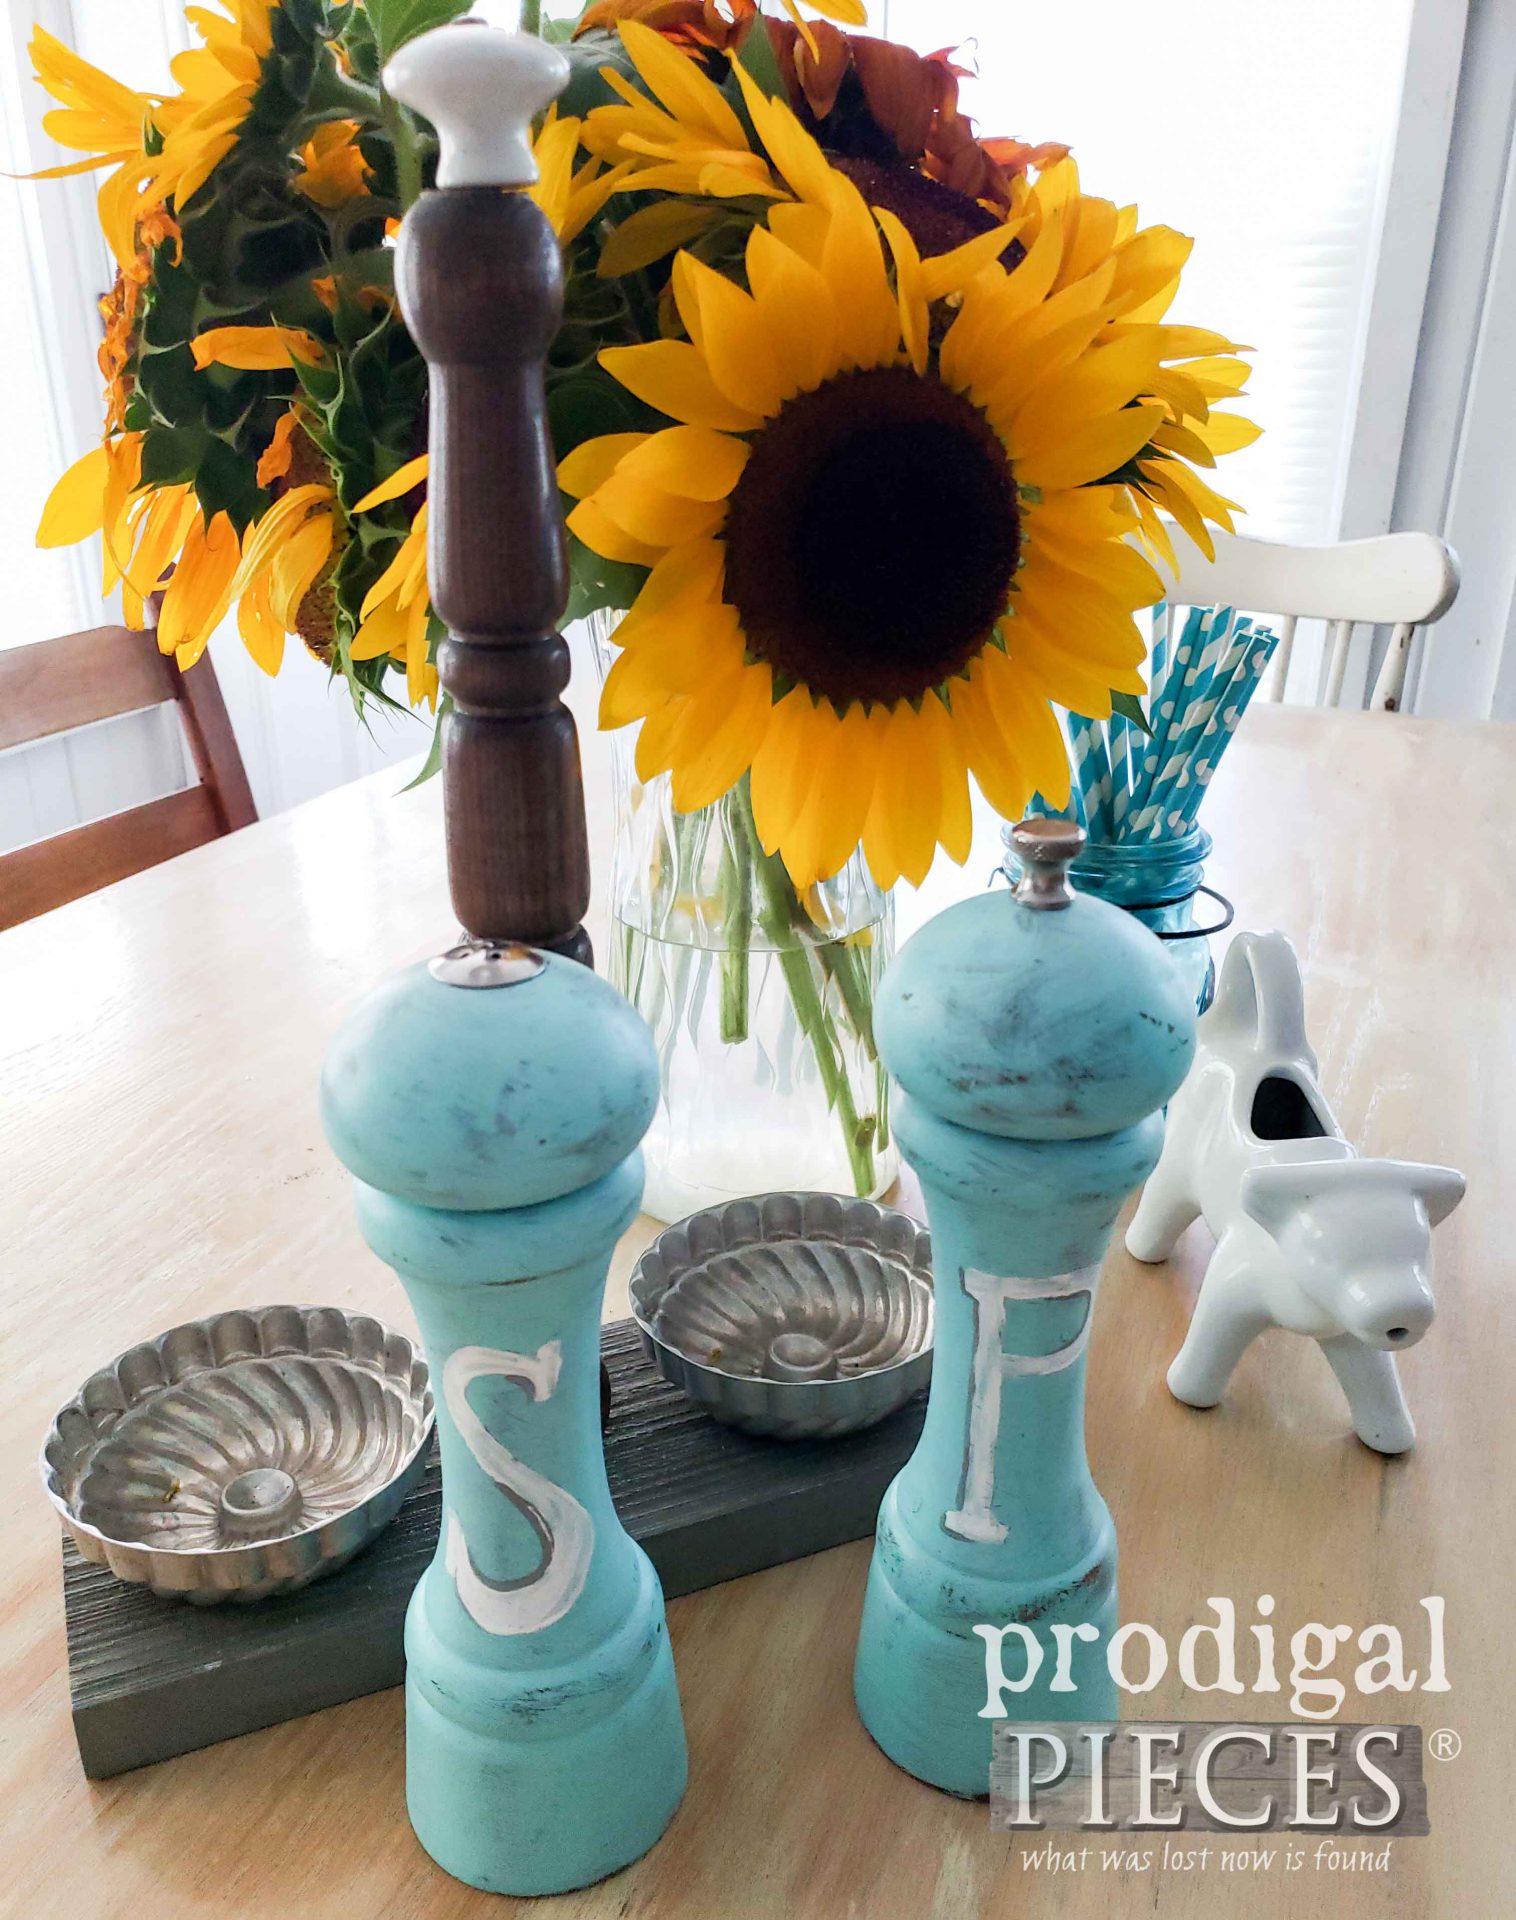 Whimsical Upcycled Salt & Pepper Set with Stand Created by Larissa of Prodigal Pieces | prodigalpieces.com #prodigalpieces #farmhouse #vintage #home #diy #homedecor #kitchen